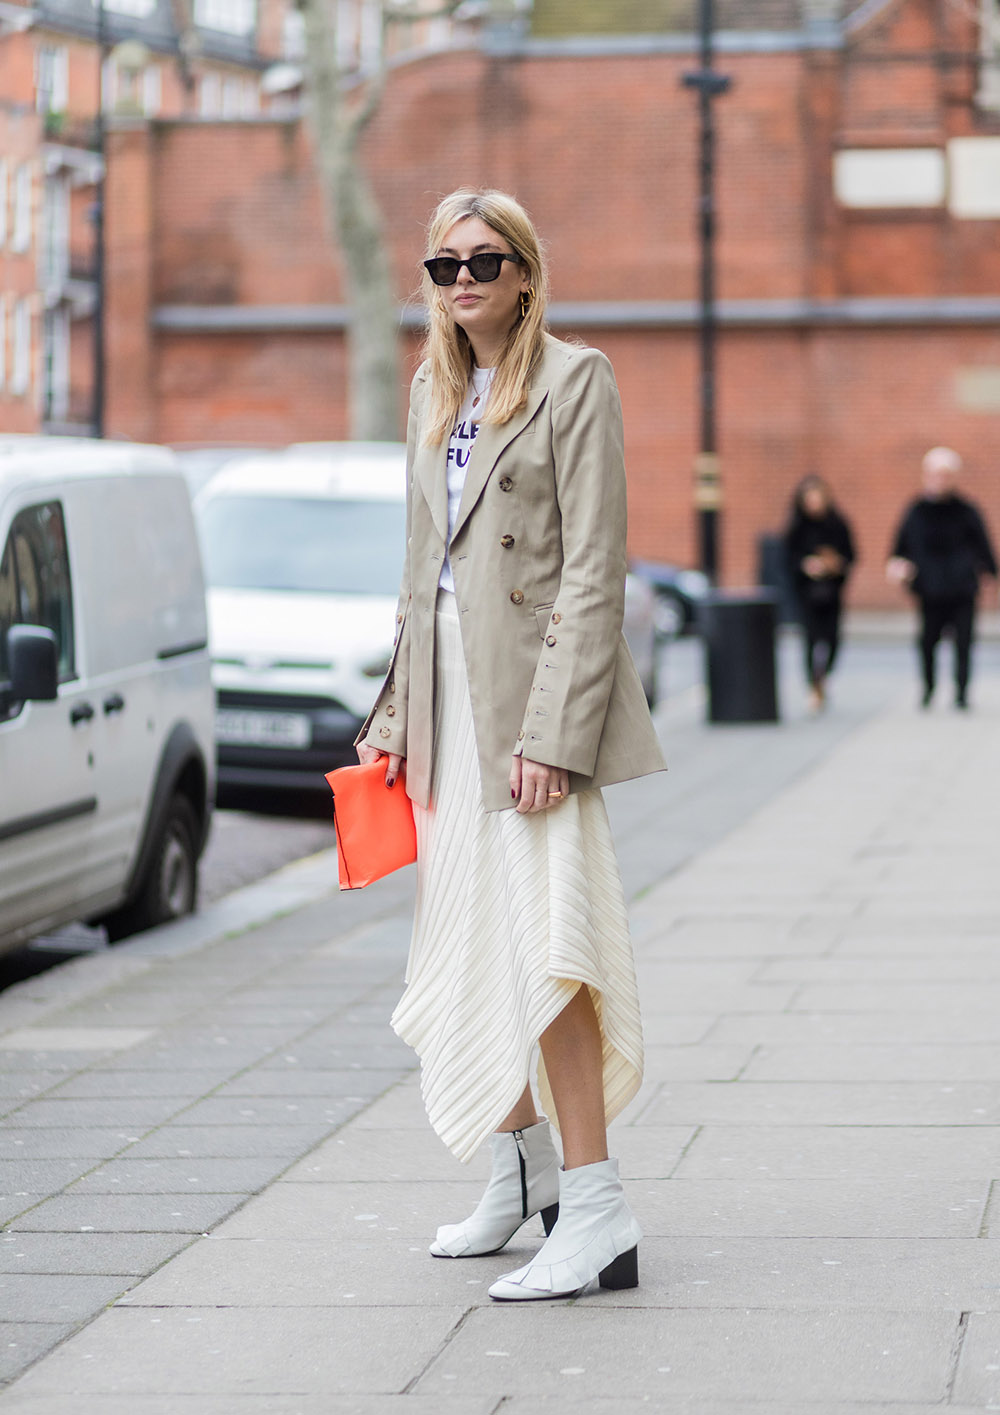 LONDON, ENGLAND - FEBRUARY 19: Camille Charriere wearing a beige jacket, white skirt, Loewe clutch outside Anya Hindmarch on day 3 of the London Fashion Week February 2017 collections on February 19, 2017 in London, England. (Photo by Christian Vierig/Getty Images)